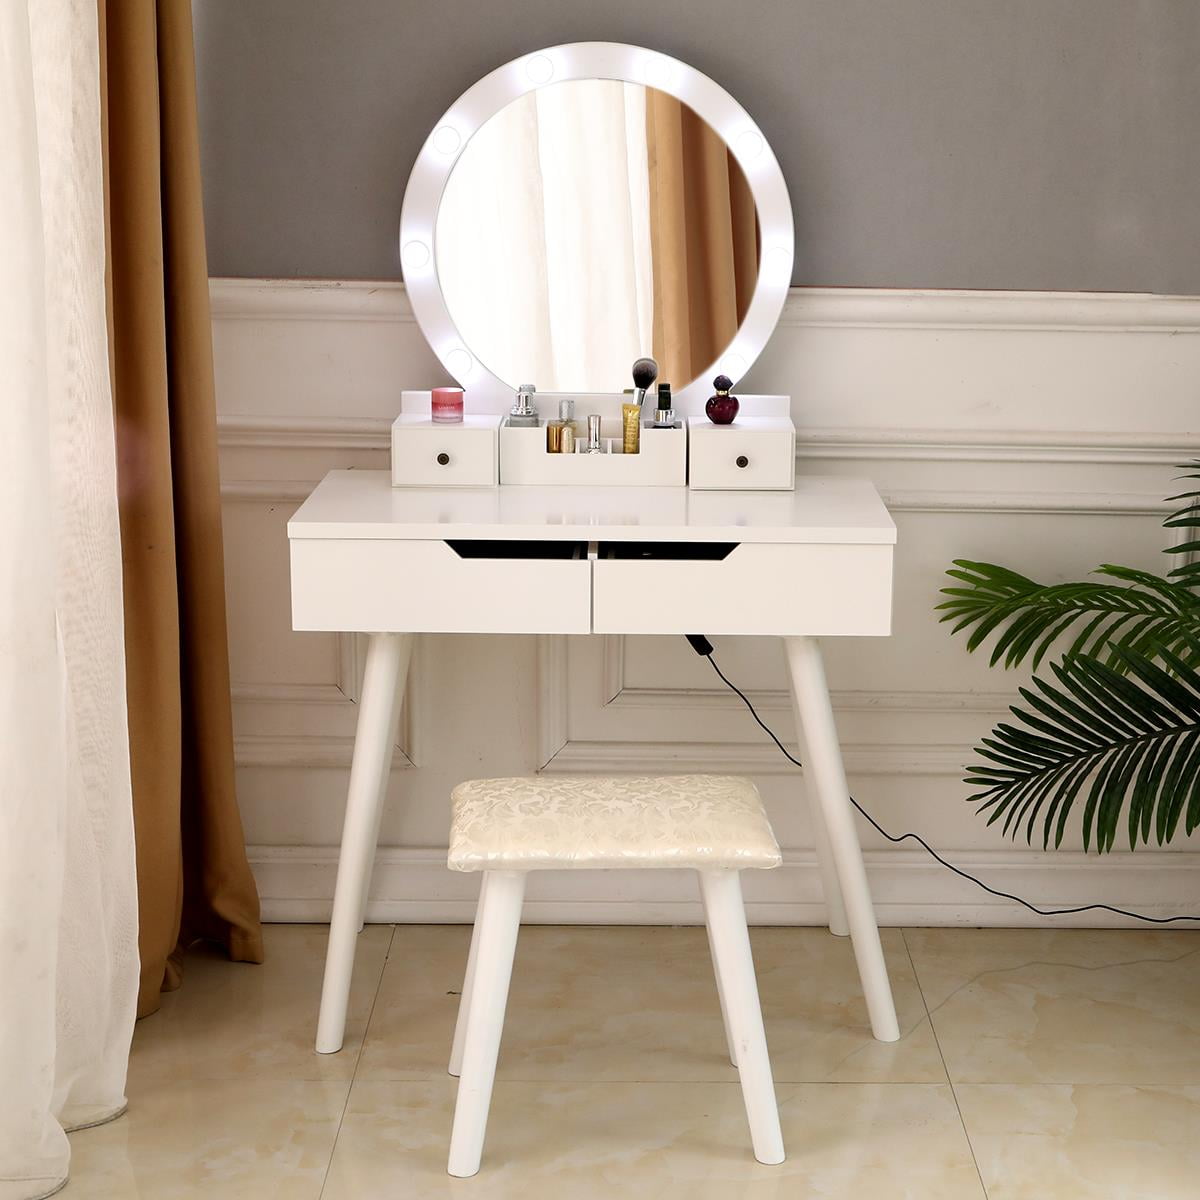 Salonmore Vanity Table Set With Lighted, White Vanity With Circle Mirror